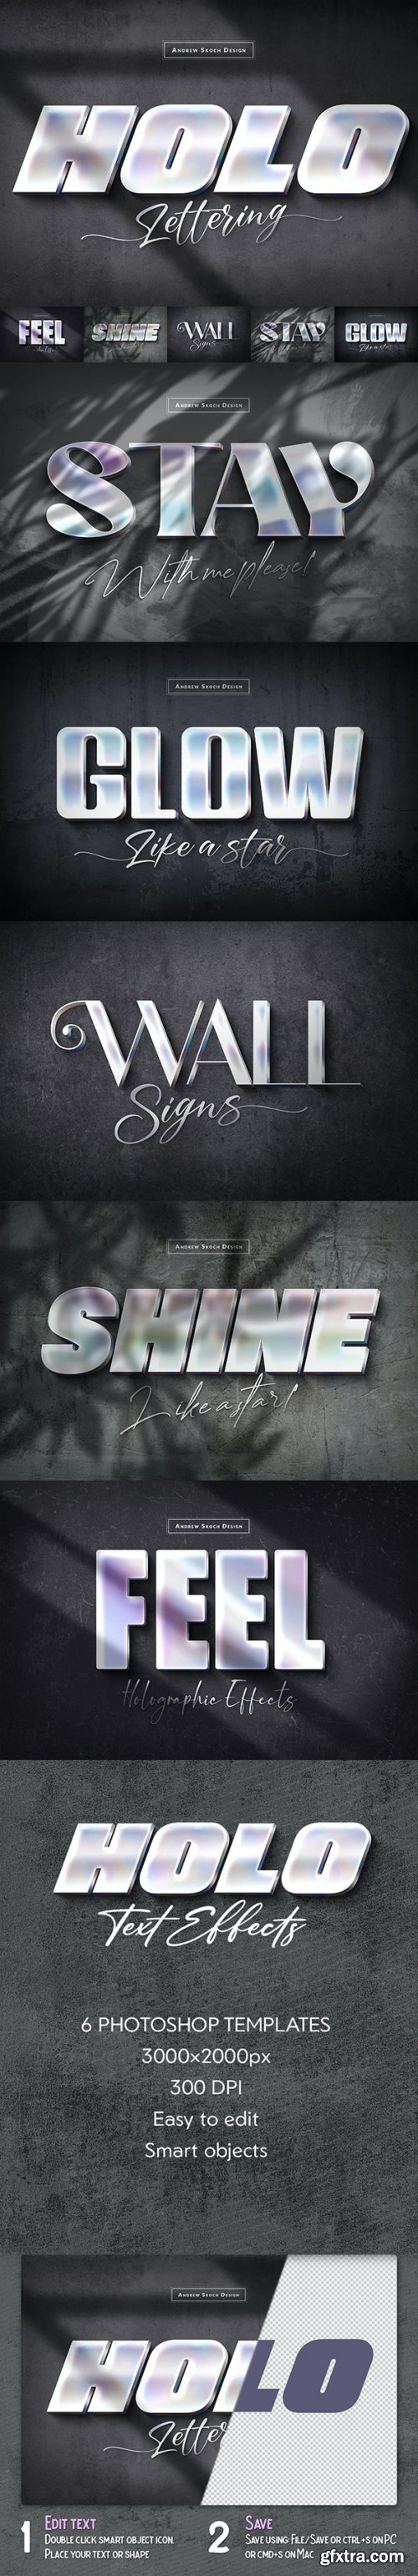 GraphiCriver - Holochrome Text Effects 38285343